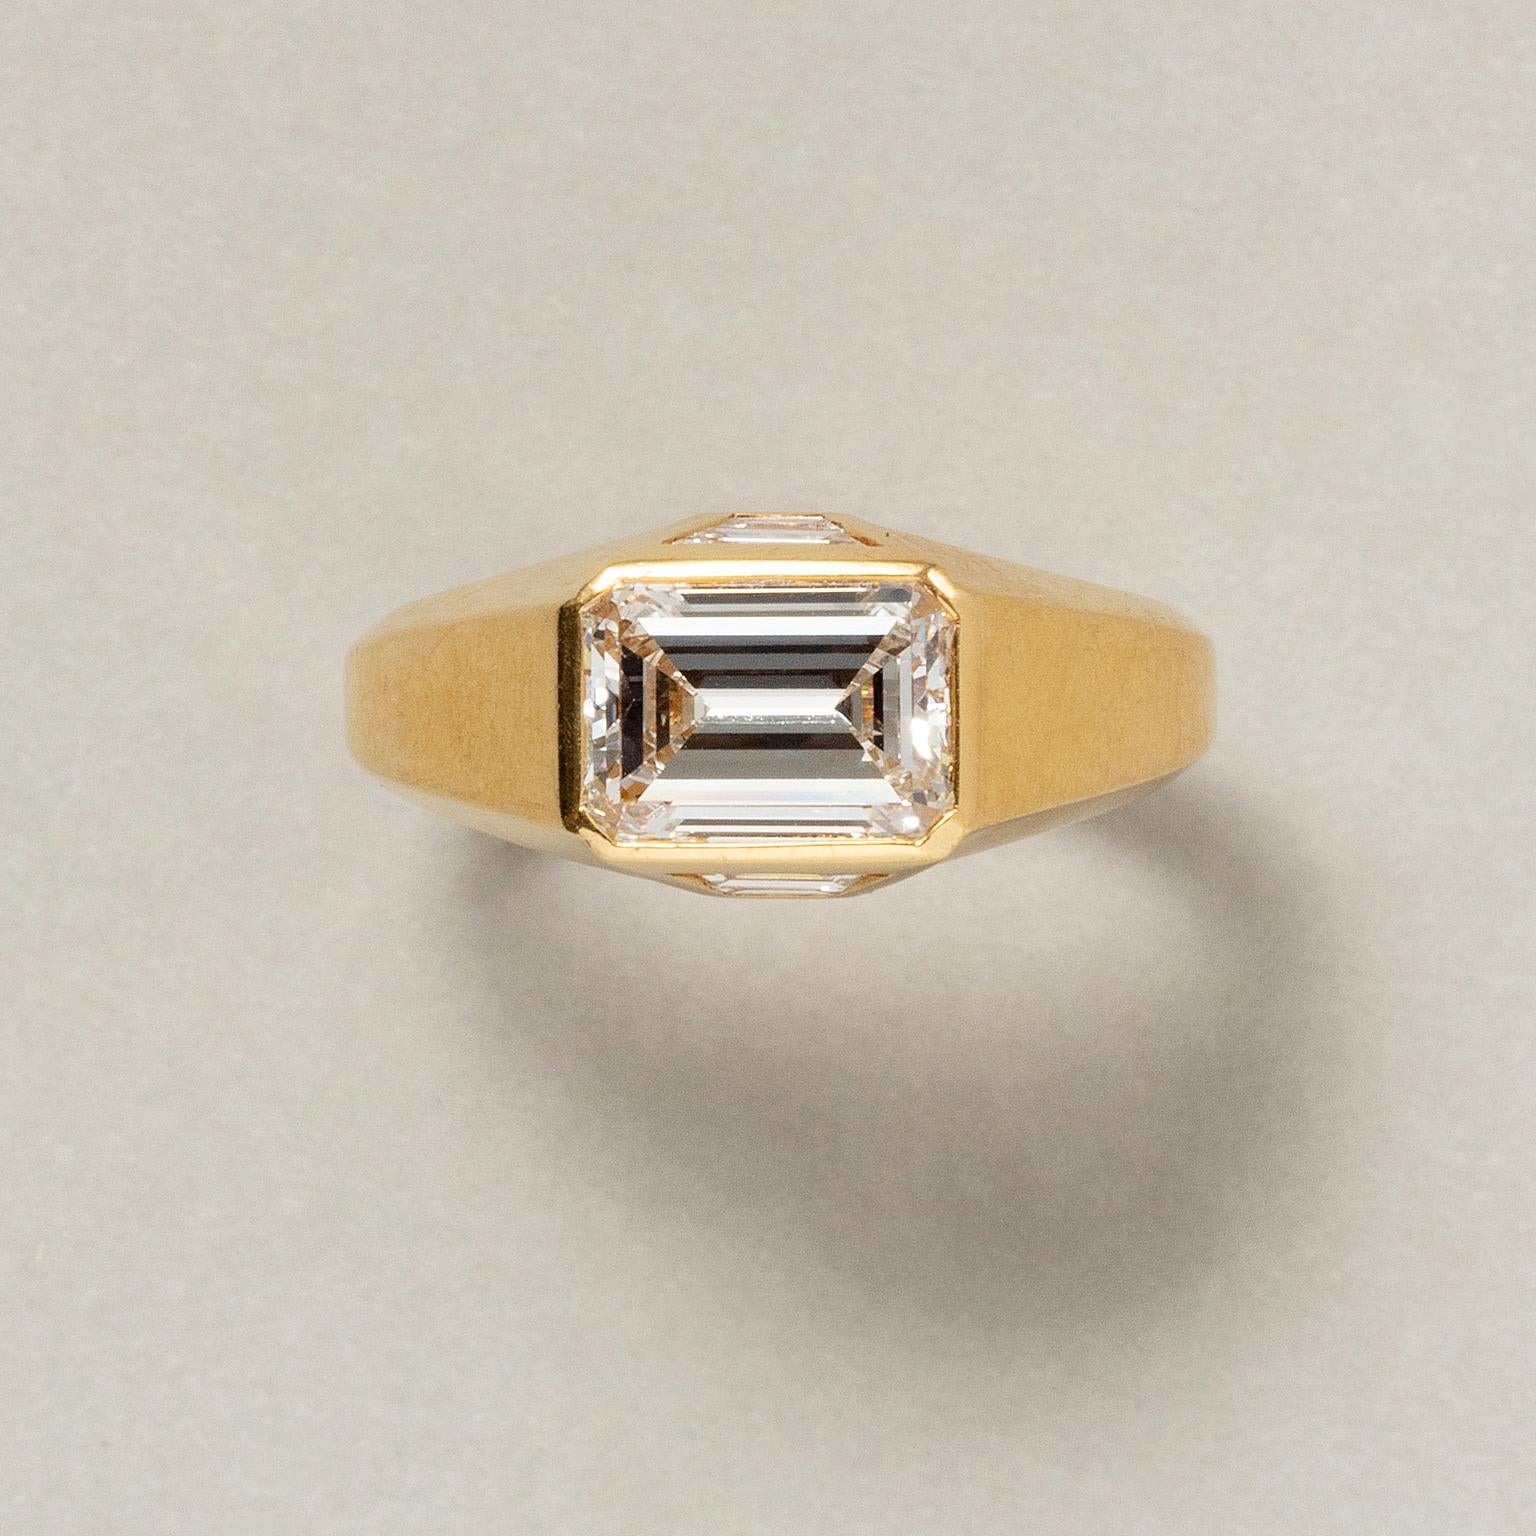 An 18 carat gold single stone ring set with a step cut diamond and each side in de shank a triangle each set with with two trapezium cut diamonds (1.77 ct in total, F – Vvs), igned: Bulgari, Rome.

ring size: 17.25 mm / 6 3/4 US
weight: 7.17 grams